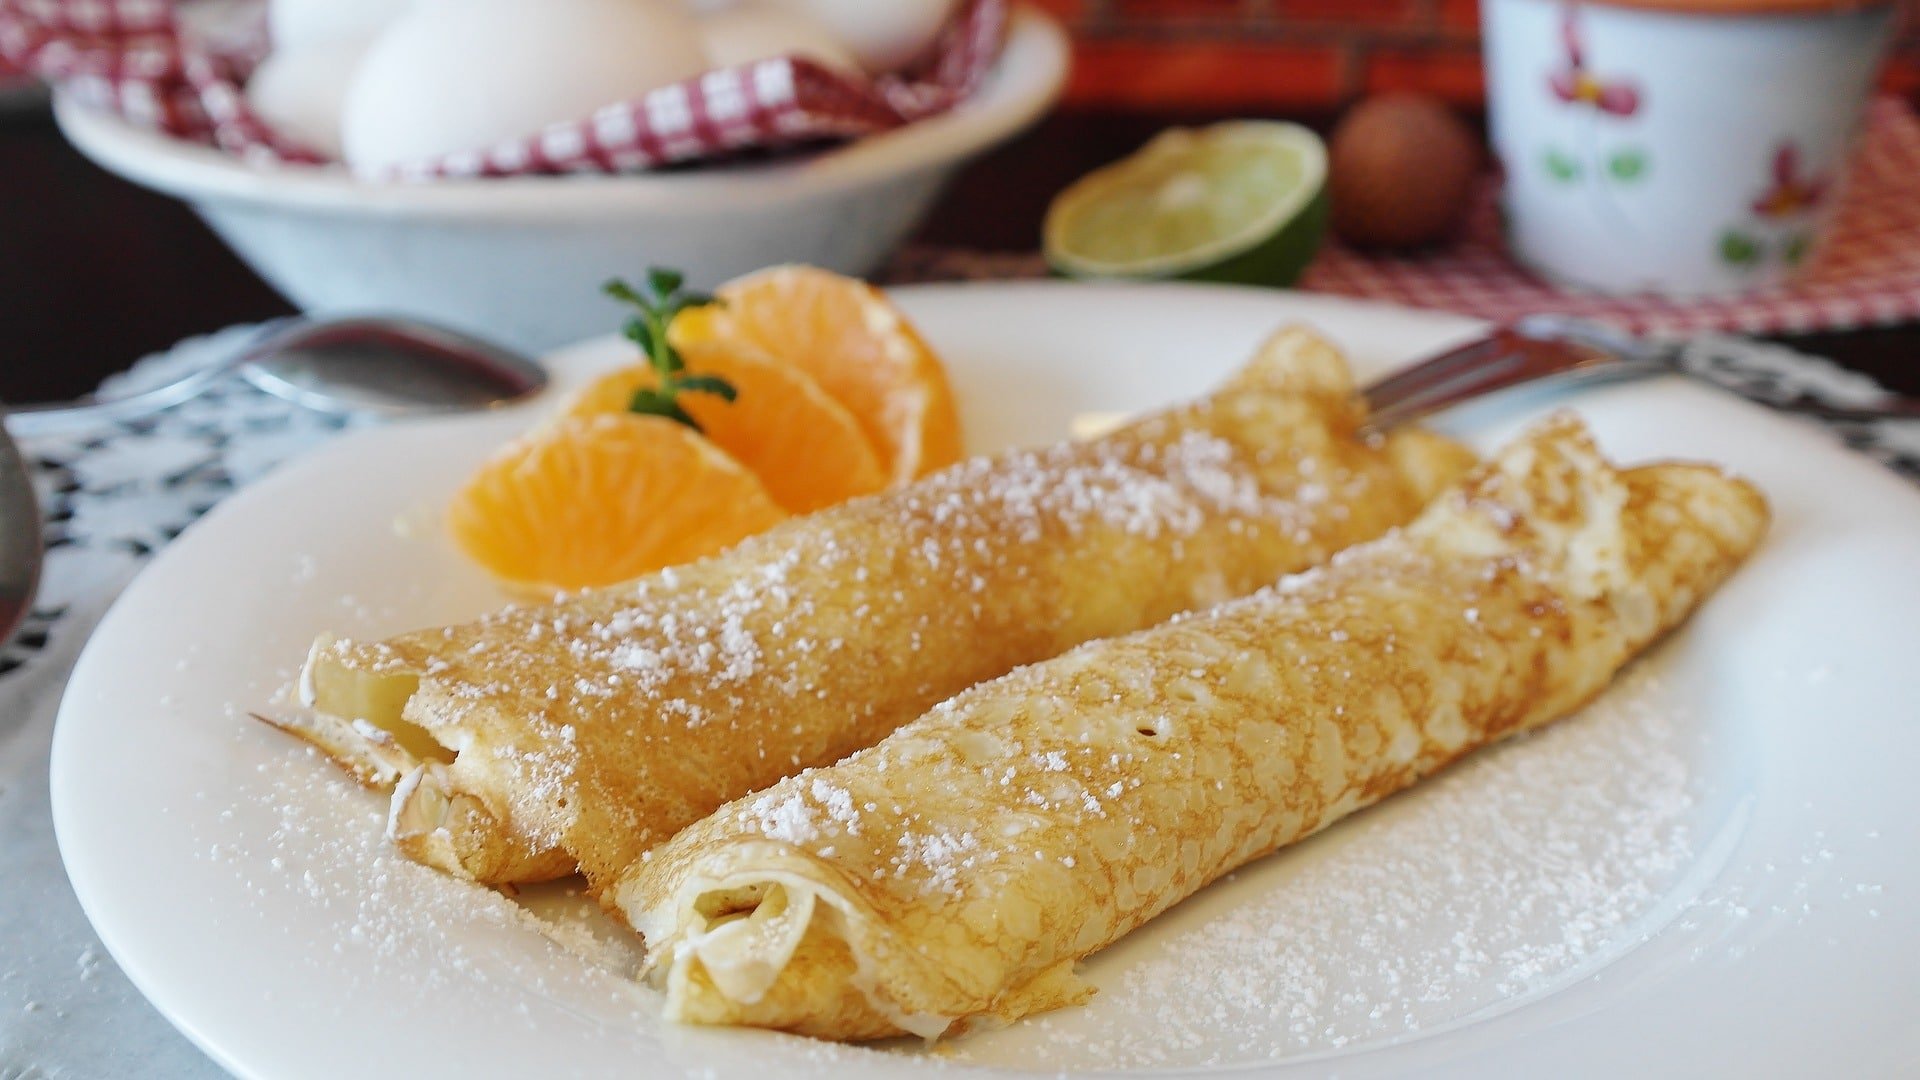 Authentic french crepes recipe as you will eat in Paris. Thin, crispy, easy to make and fill with anything you like such as jam, fruit, chocolate or cream. Easy and healthy traditional French breakfast crepes.